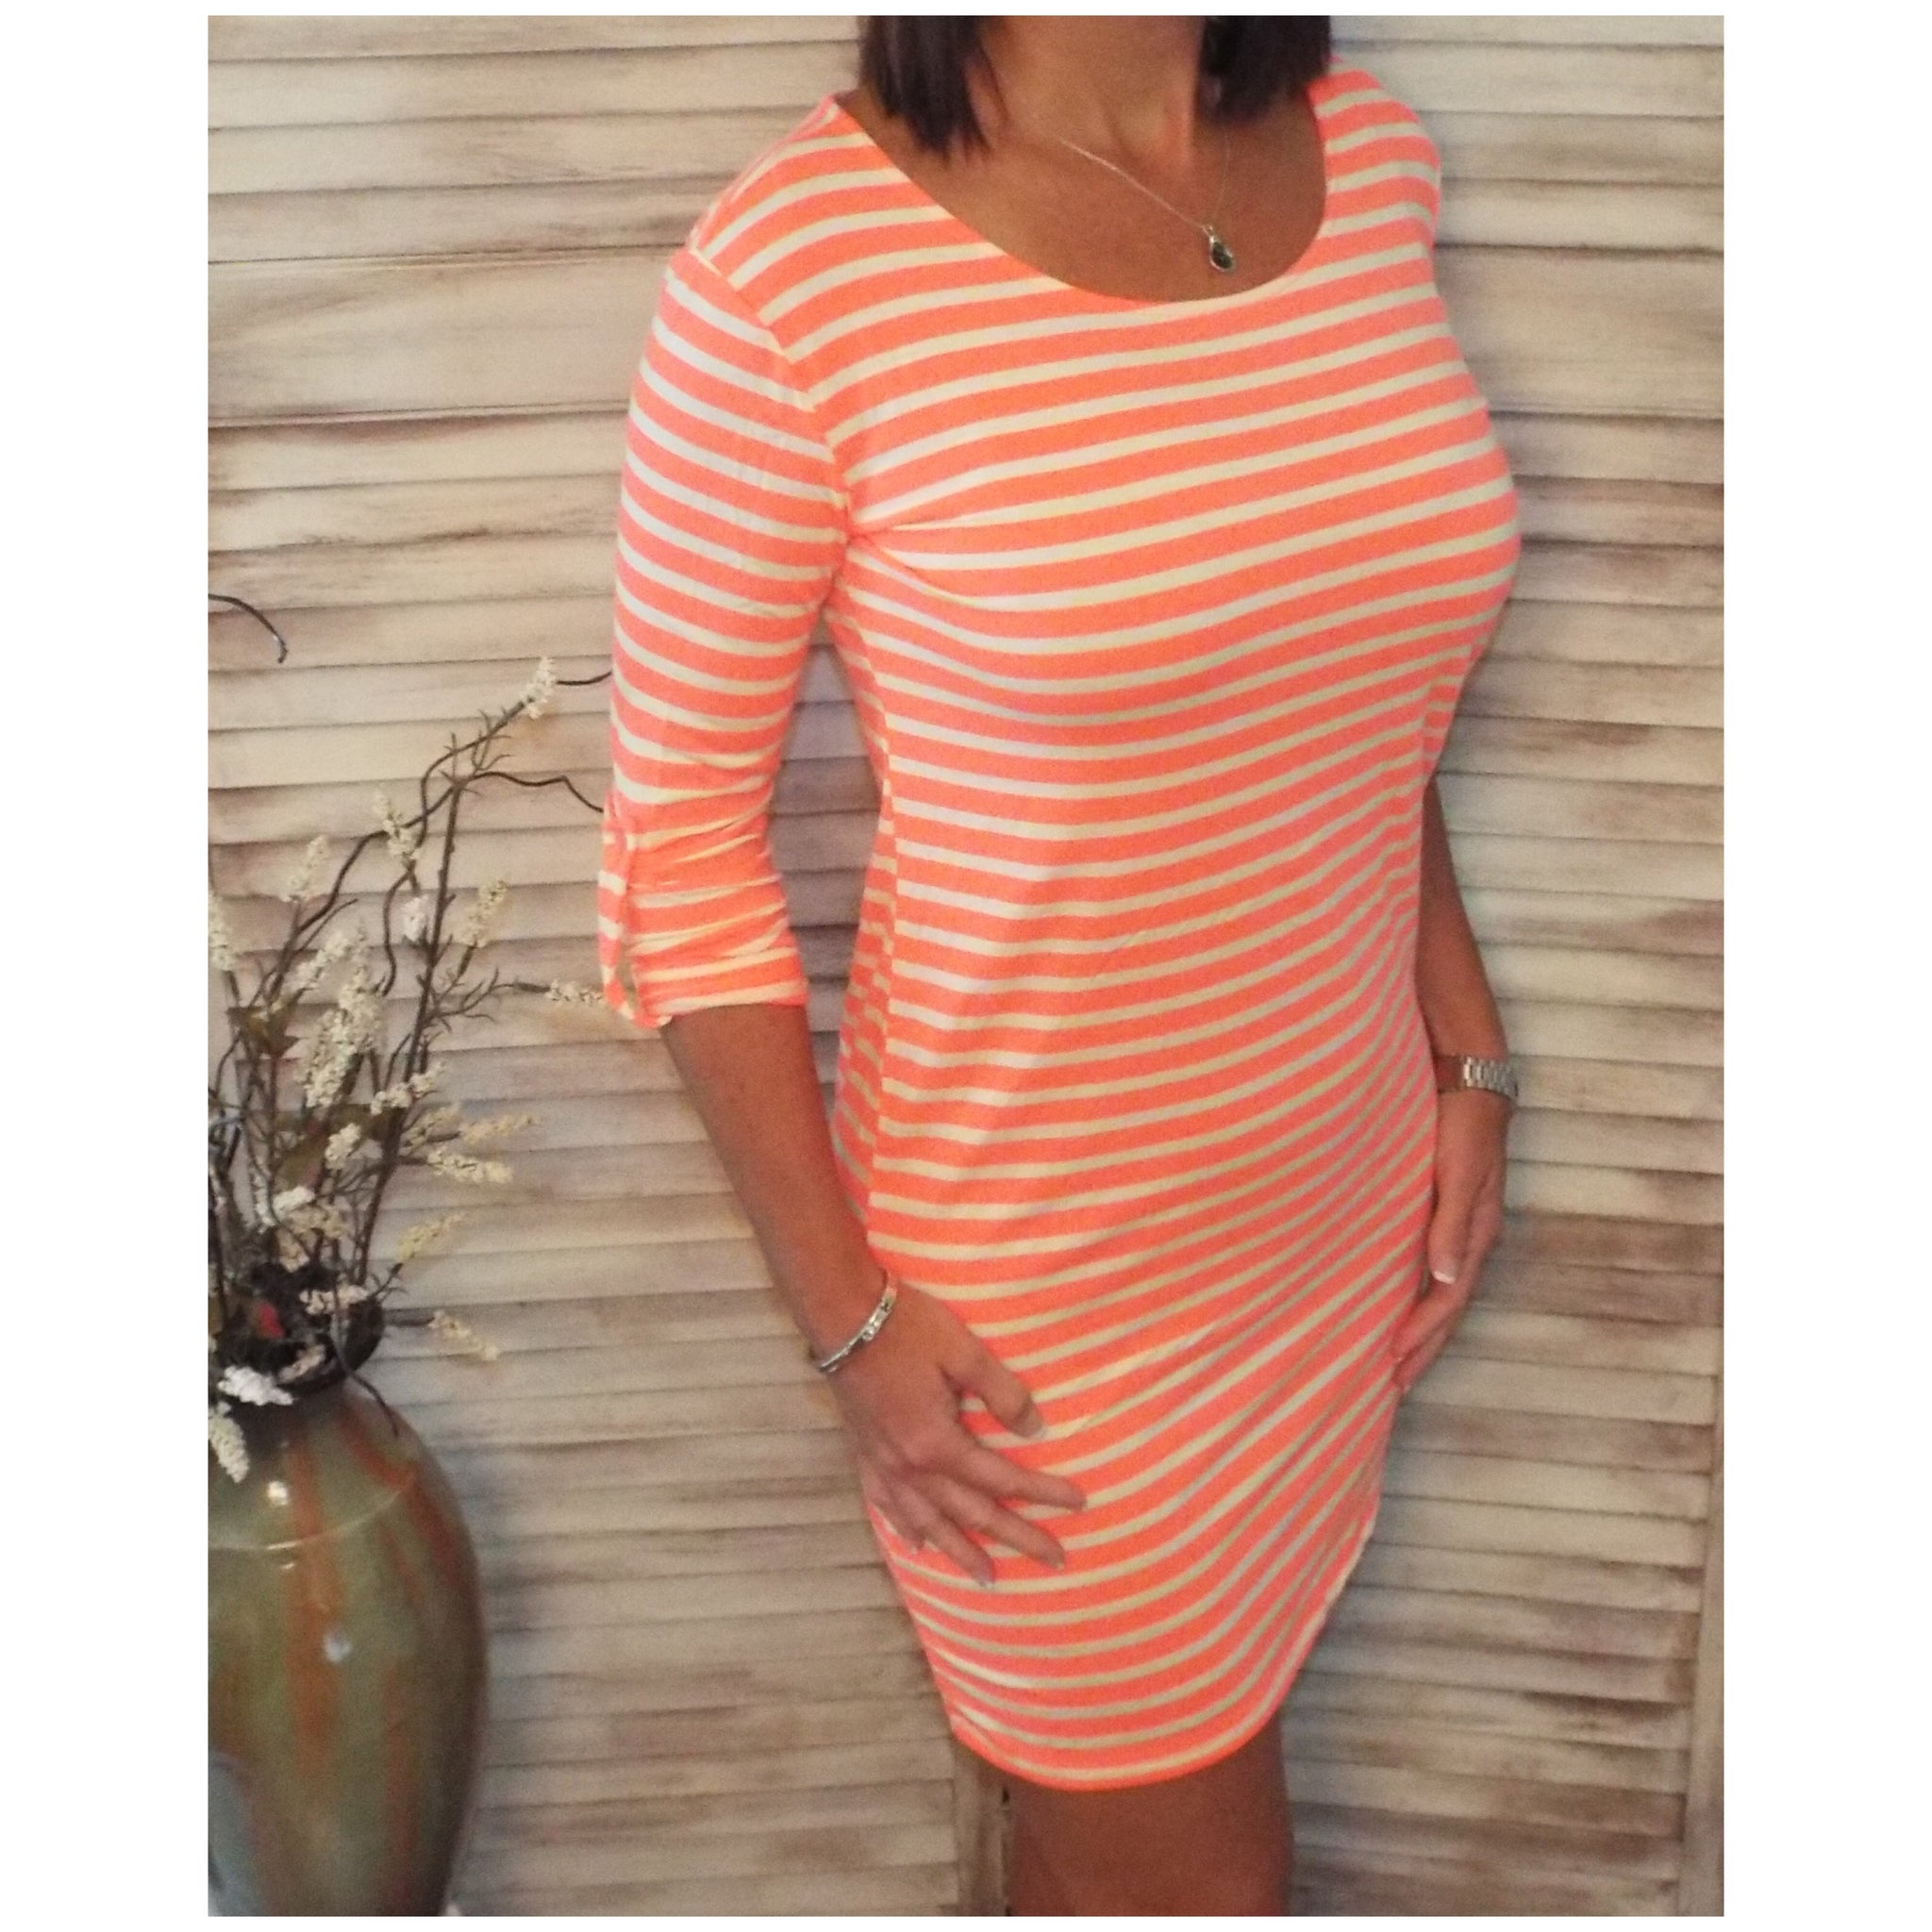 Sexy Boat Neck Striped Tab Sleeve Summer Tee Shirt Dress Neon Coral